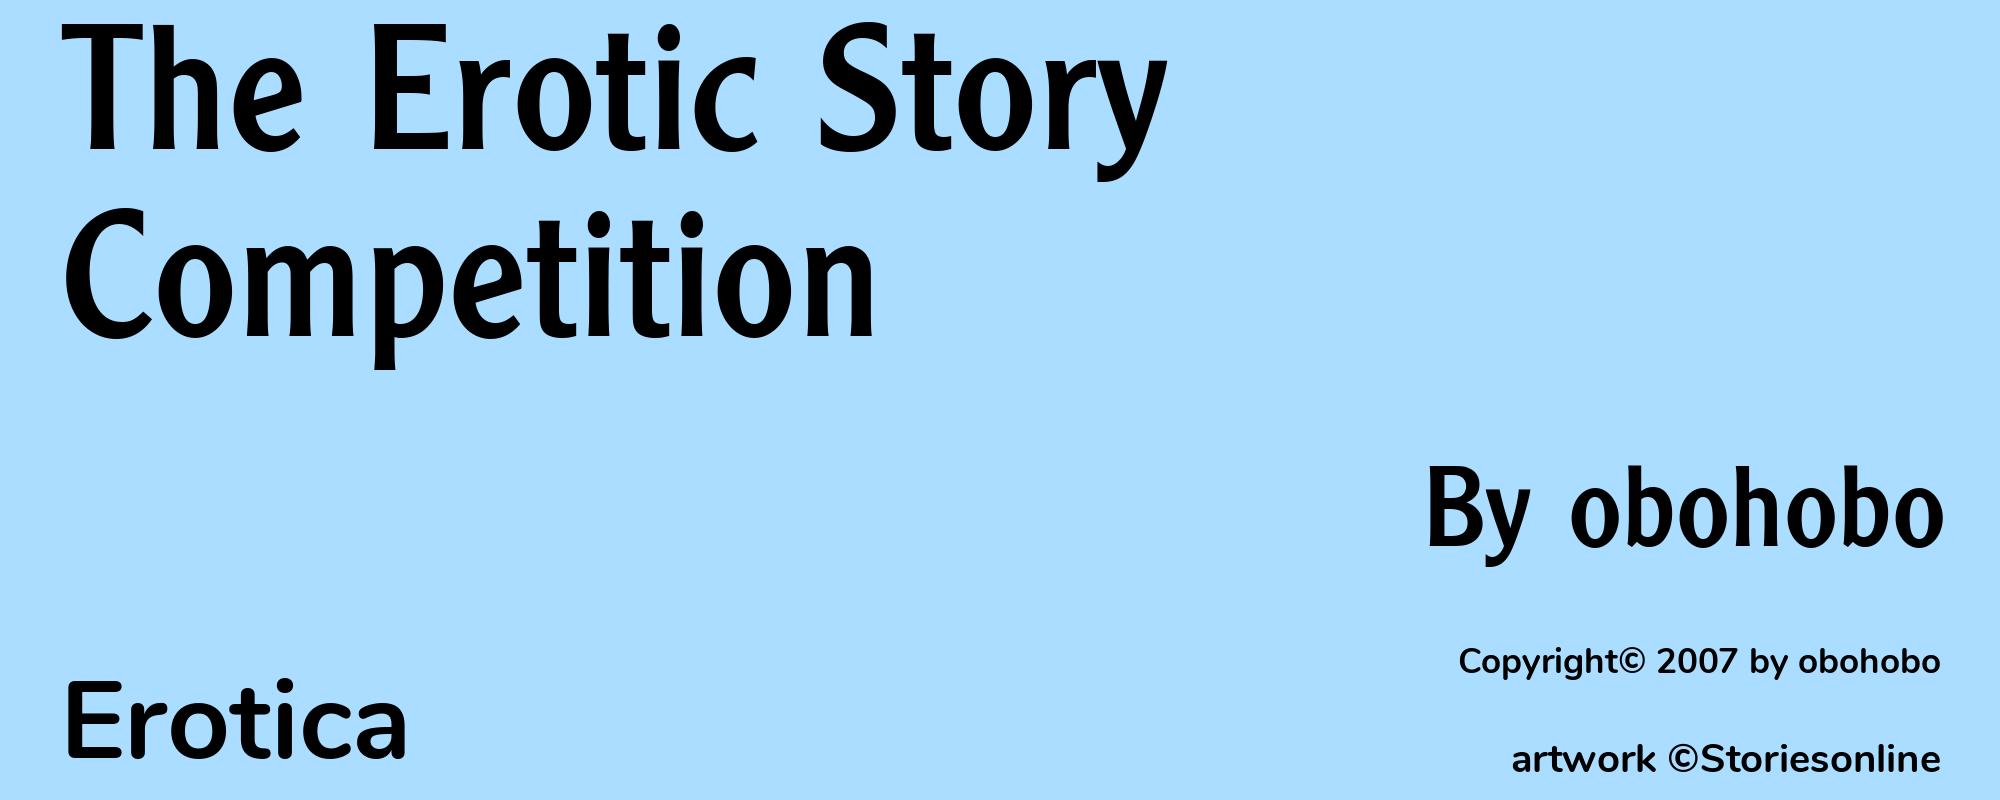 The Erotic Story Competition - Cover